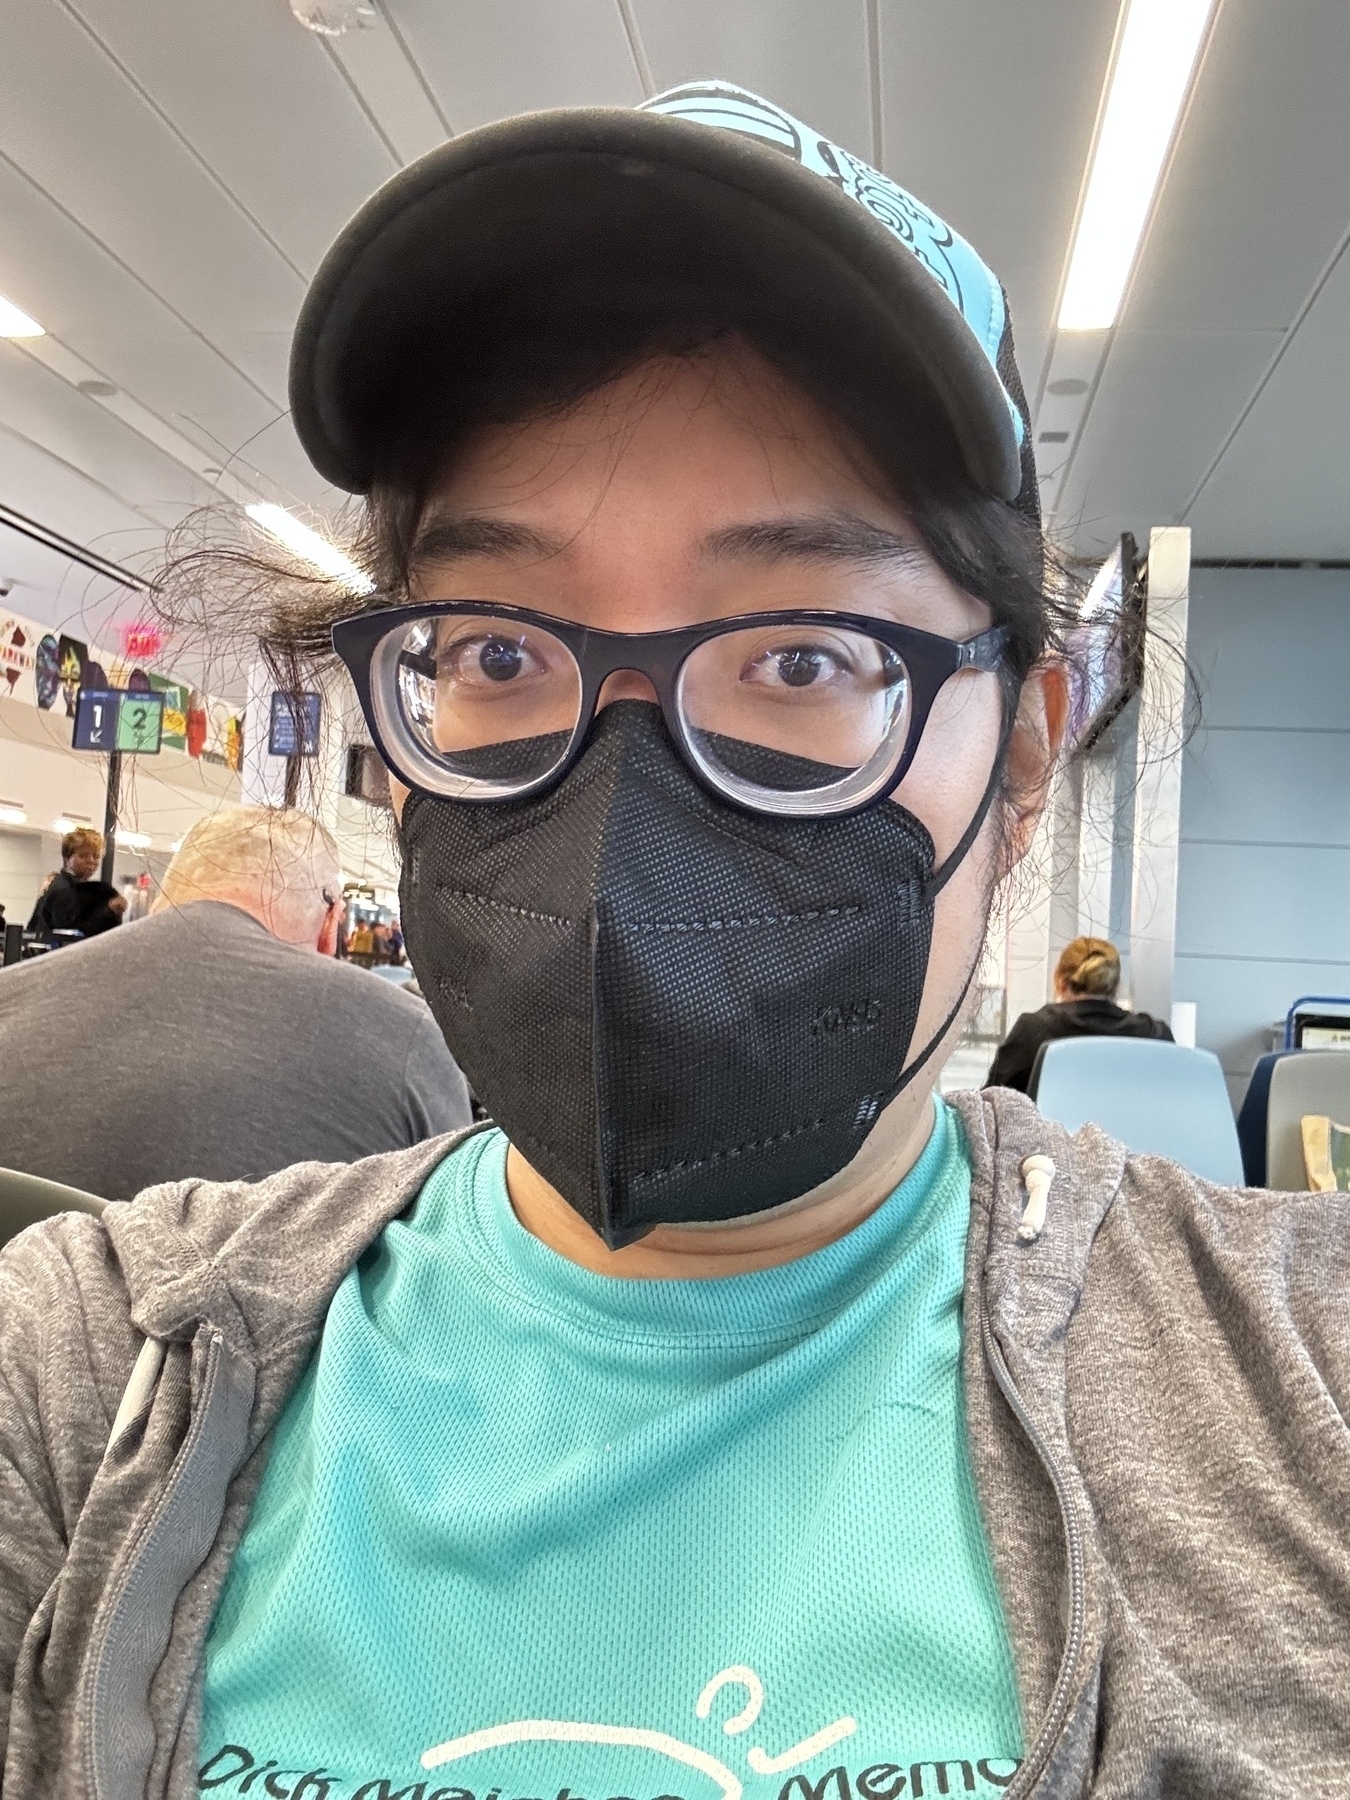 Miguel a Masc Filipino man with a real shirt and a teal hat in a black face mask in an airport gate 